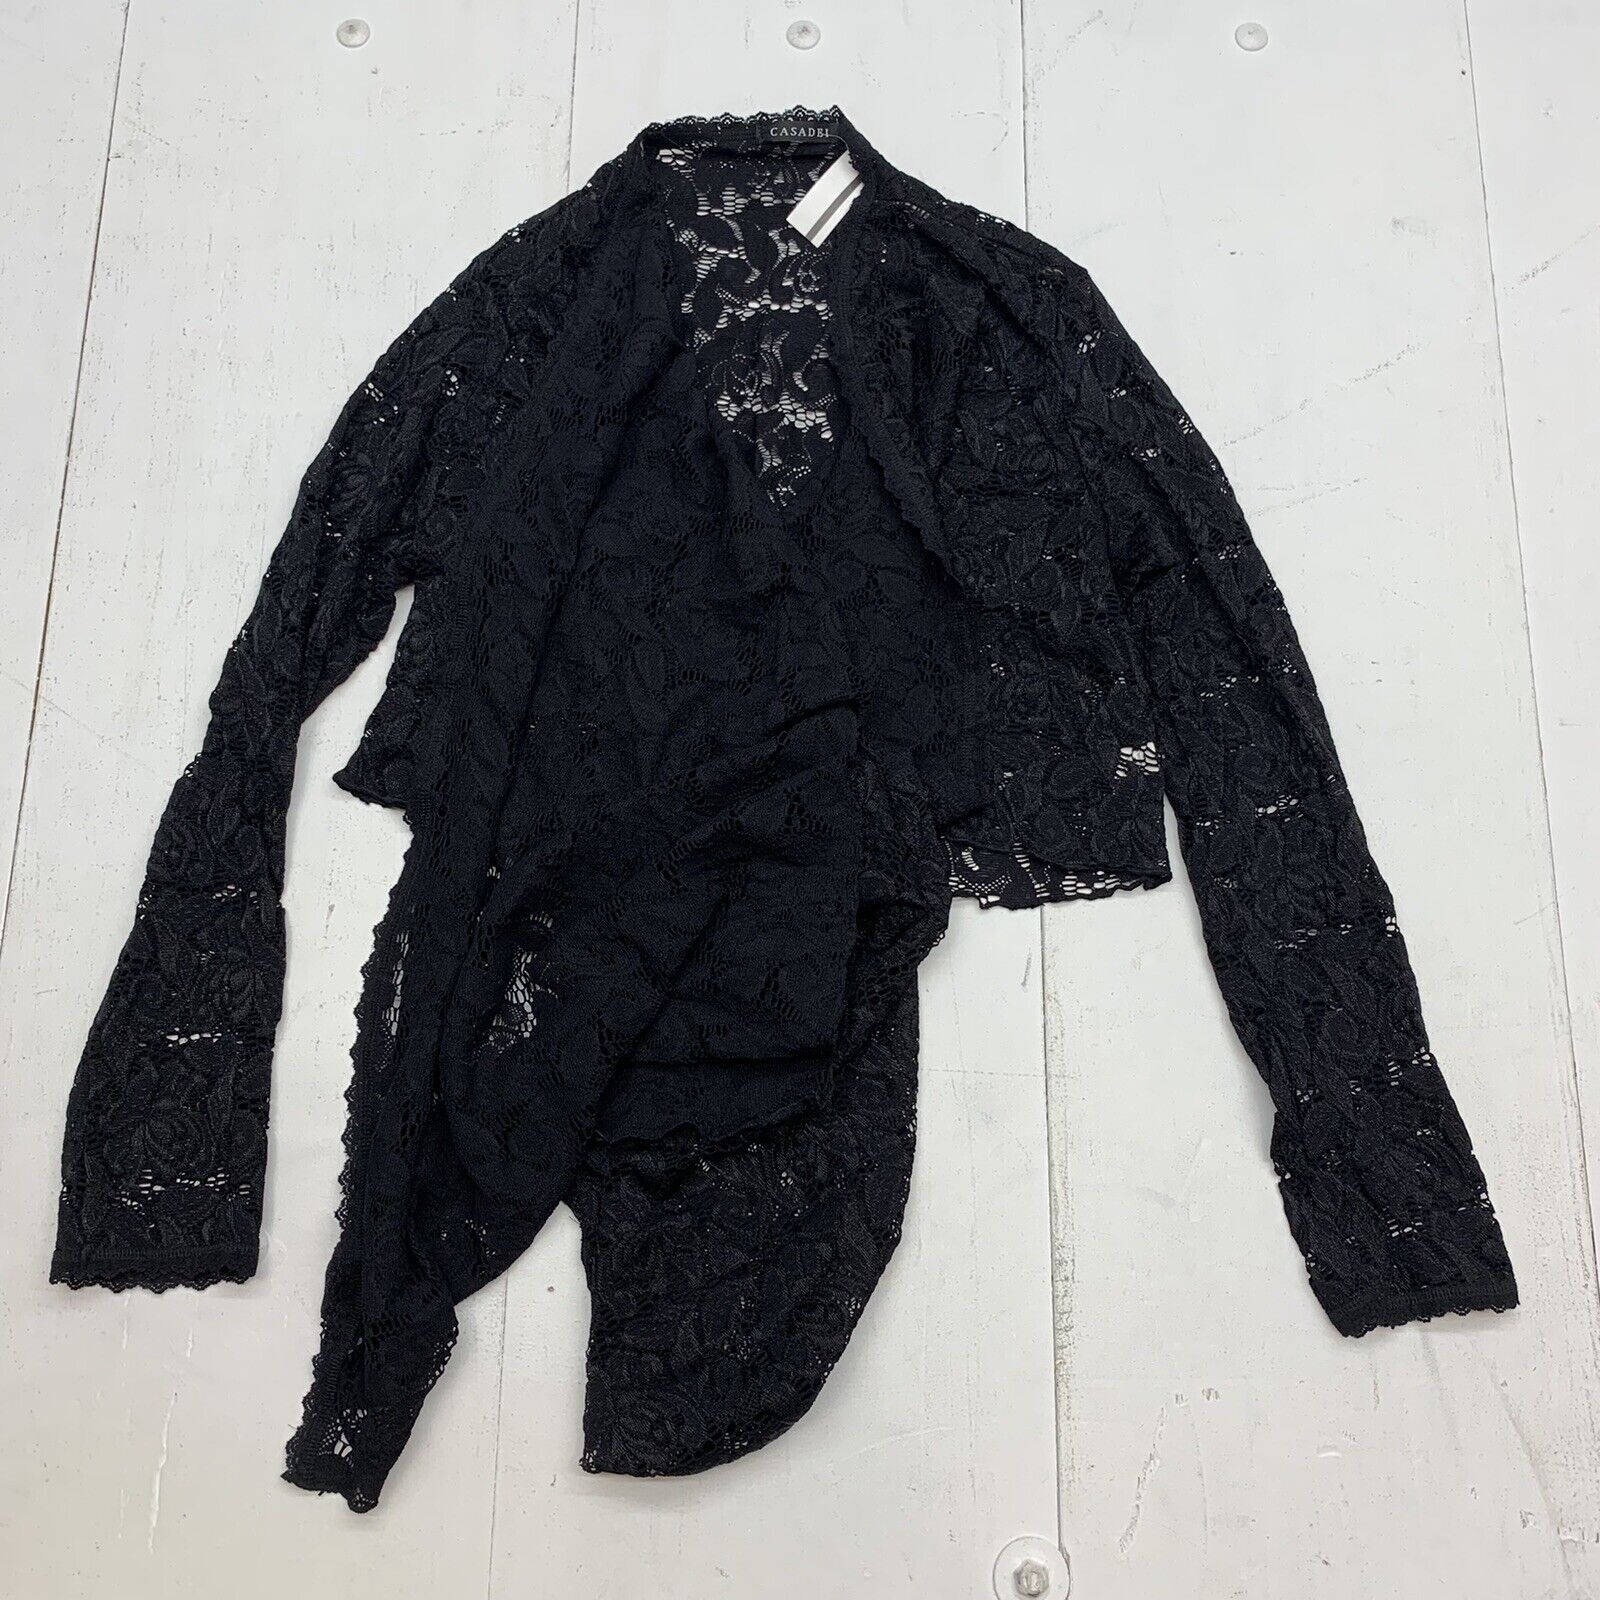 Casadei Womens Black Lace Open Front Cardigan Size XL